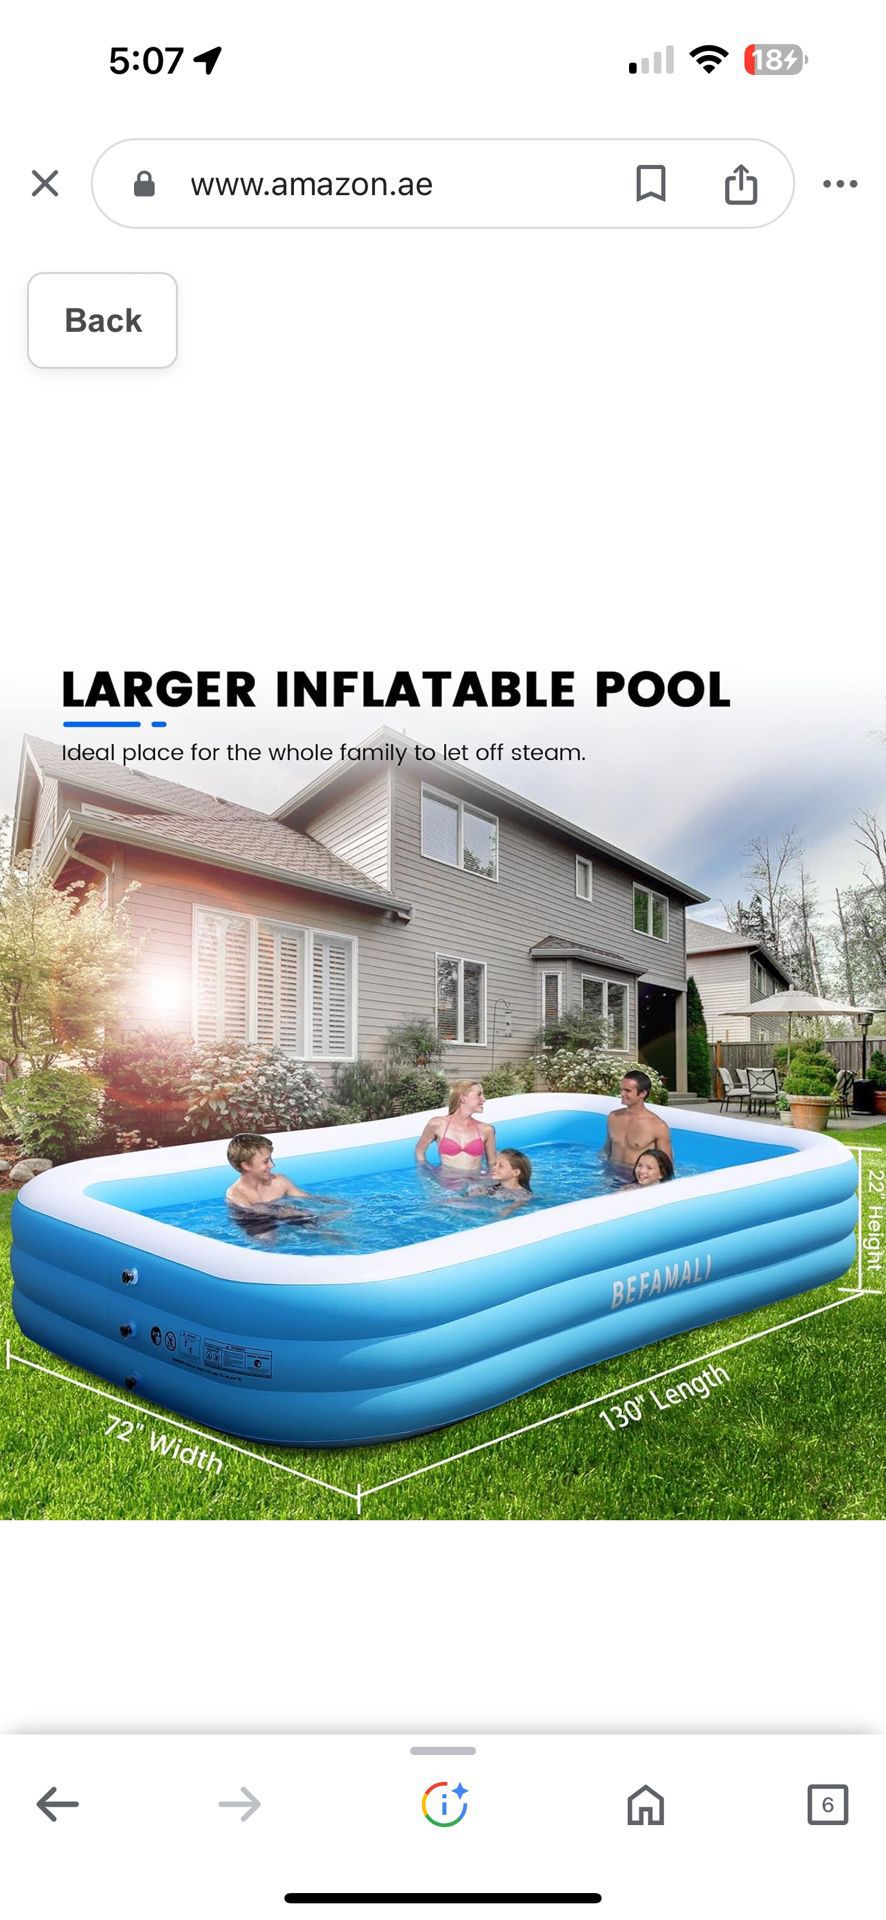 Larger Inflatable Pool 